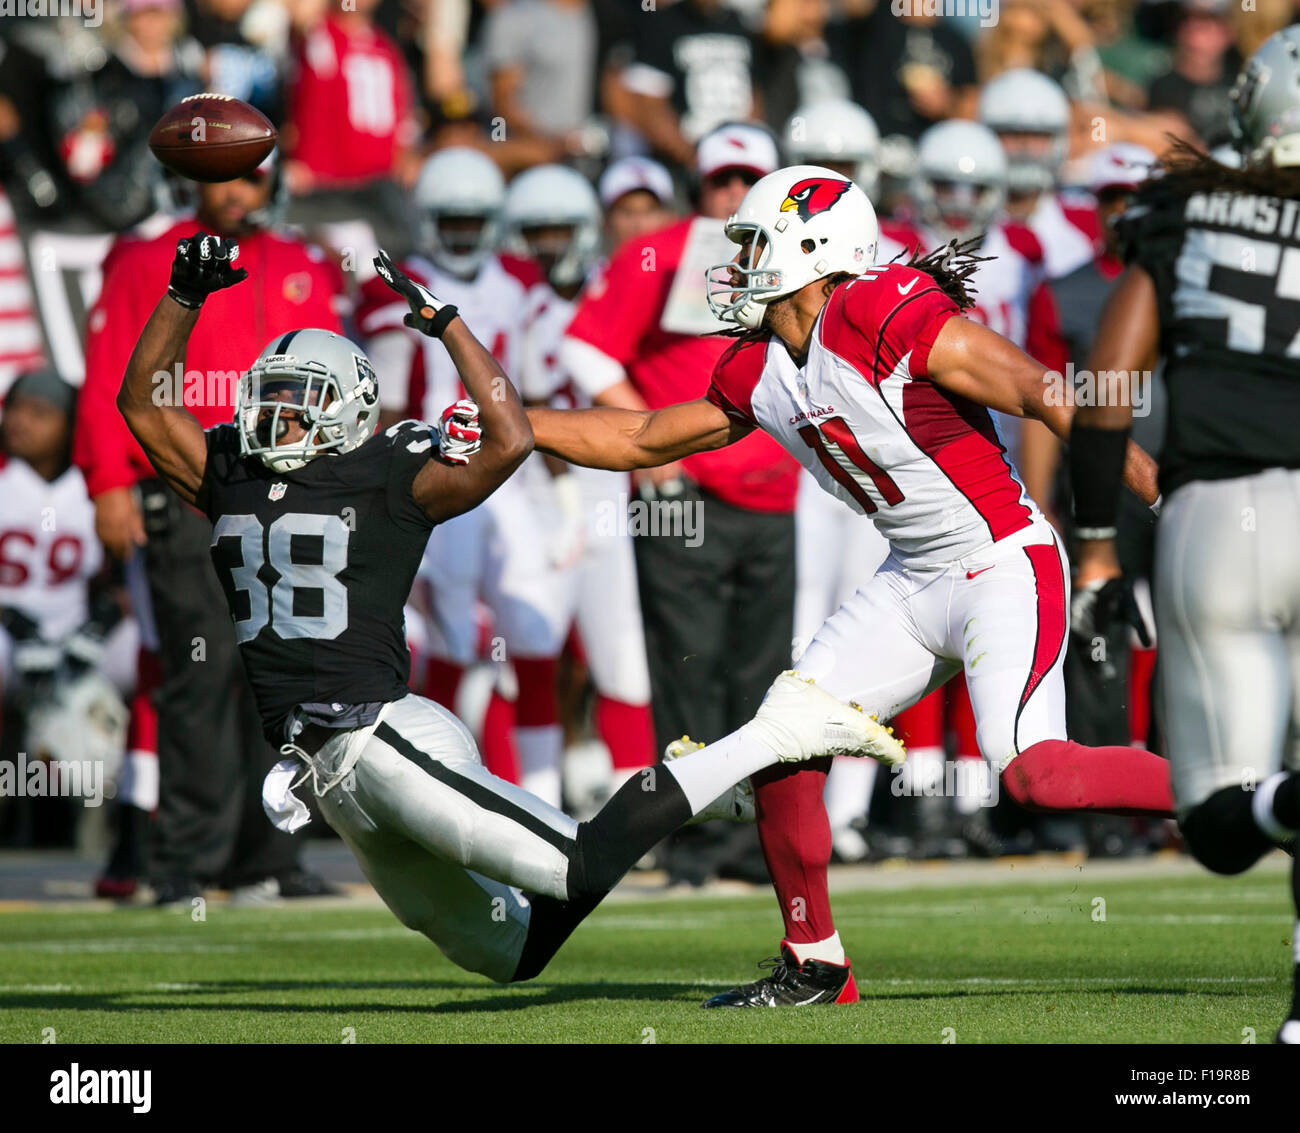 Oakland, CA. 30th Aug, 2015. Oakland Raiders cornerback T.J. Carrie (38) breaks up a pass intended for Arizona Cardinals wide receiver Larry Fitzgerald (11) during the NFL football game between the Oakland Raiders and the Arizona Cardinals at the O.co Coliseum in Oakland, CA. The Cardinals defeated the Raiders 30-23. Damon Tarver/Cal Sport Media/Alamy Live News Stock Photo